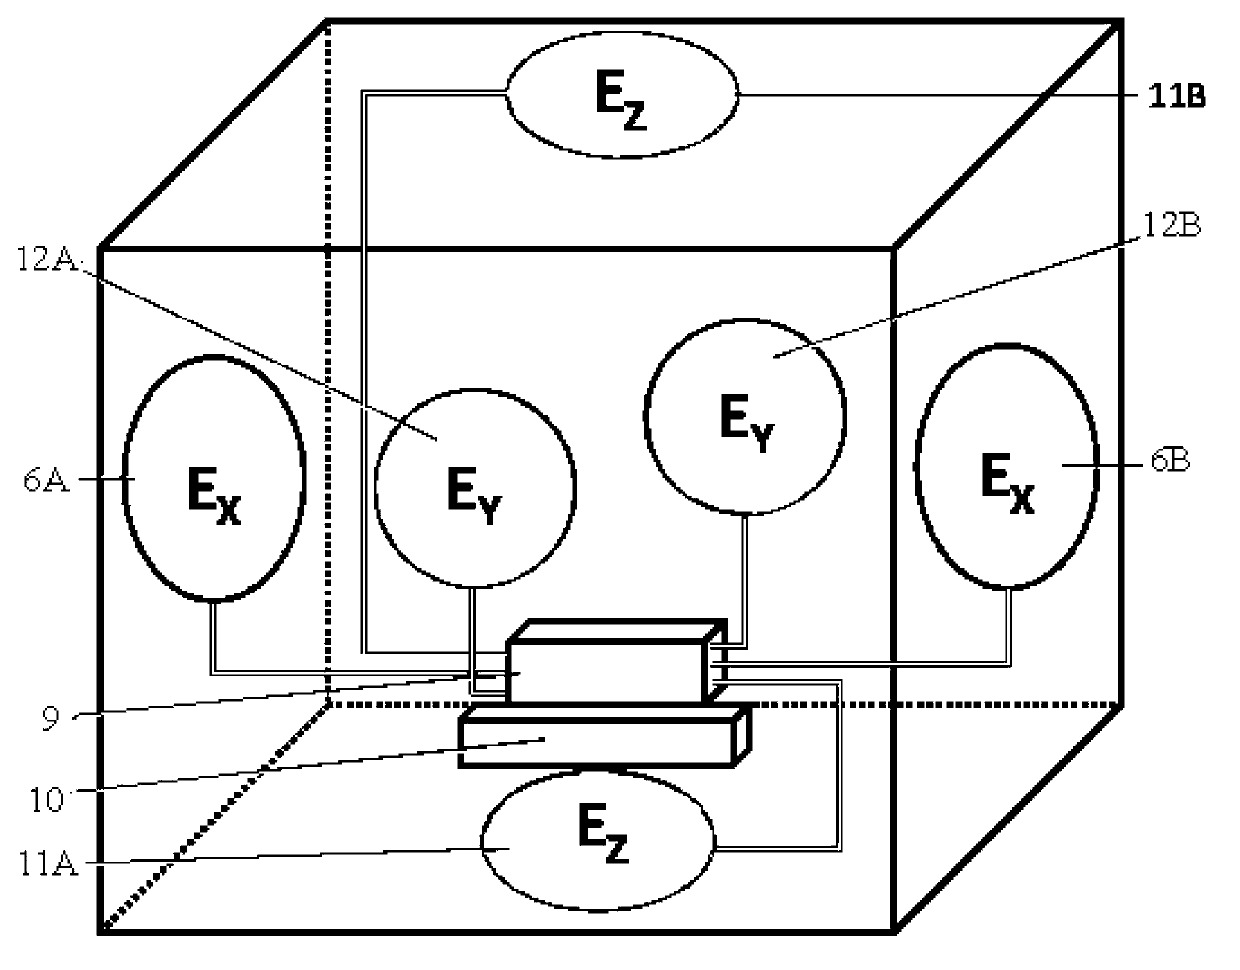 Three-component magnetic field and three-component electric field ocean electromagnetic data collection station